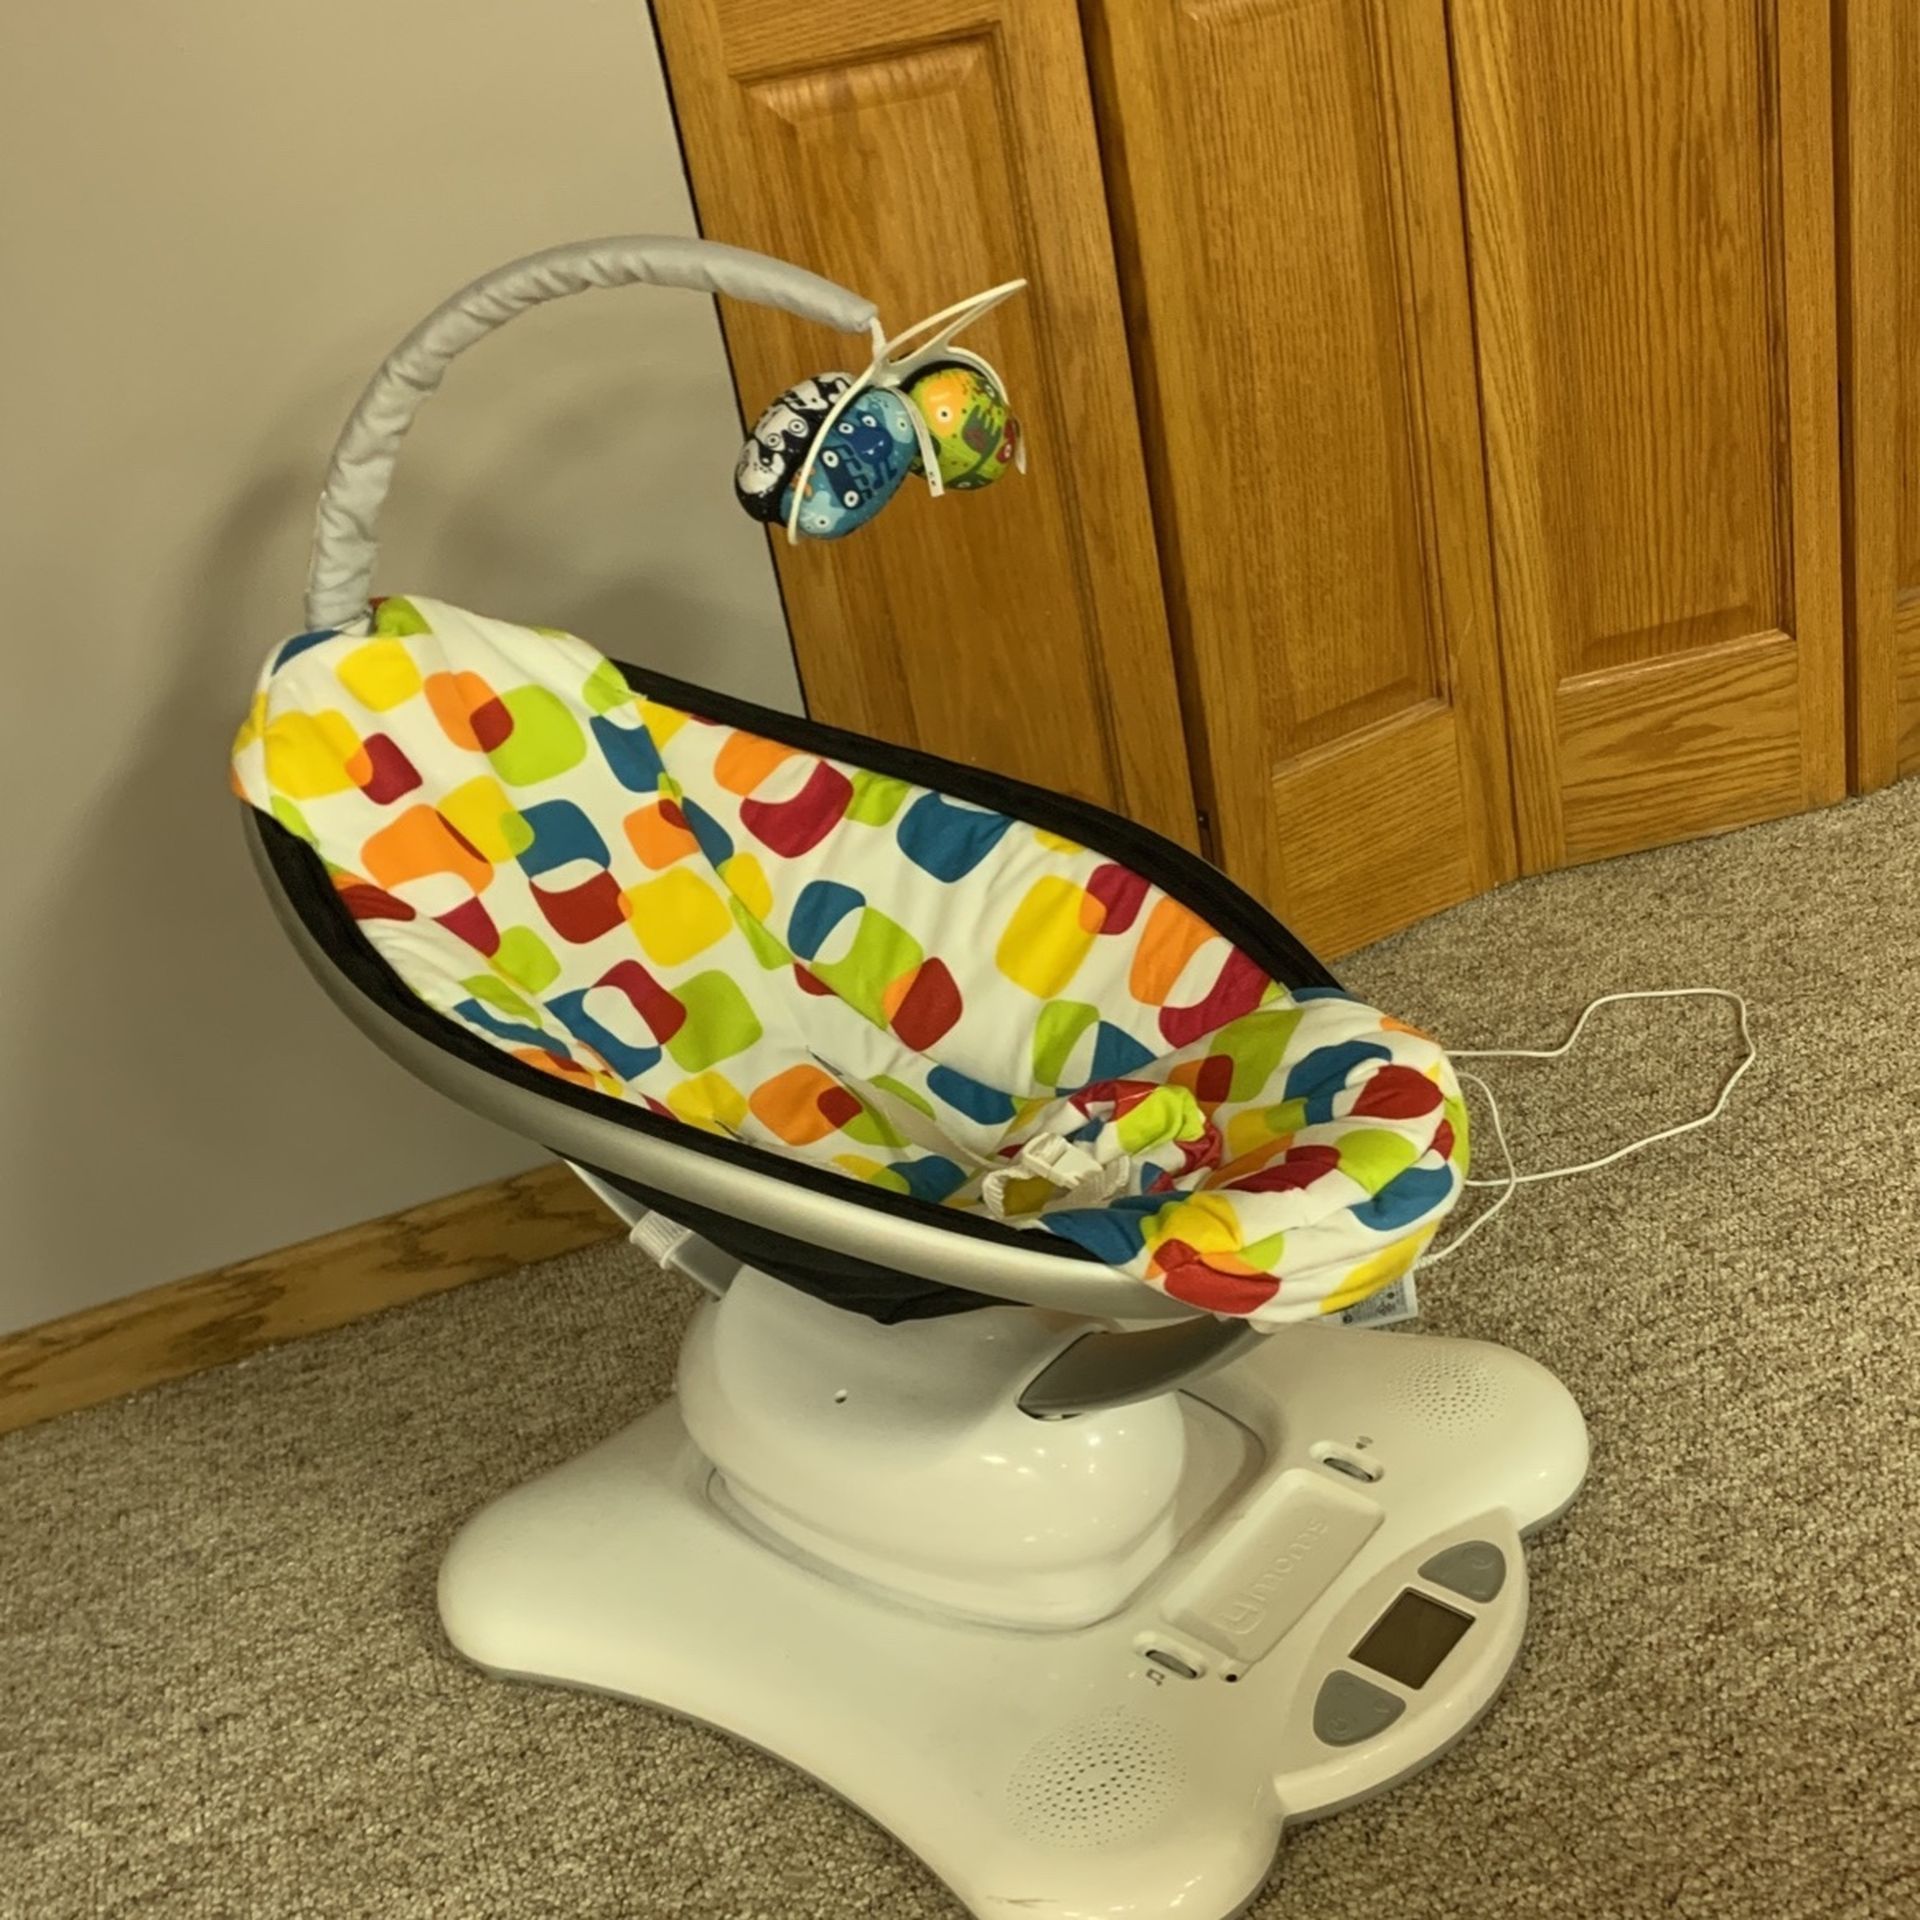 4 MOMS MAMAROO 4 5 Unique Motions W Music Baby Swing Classic